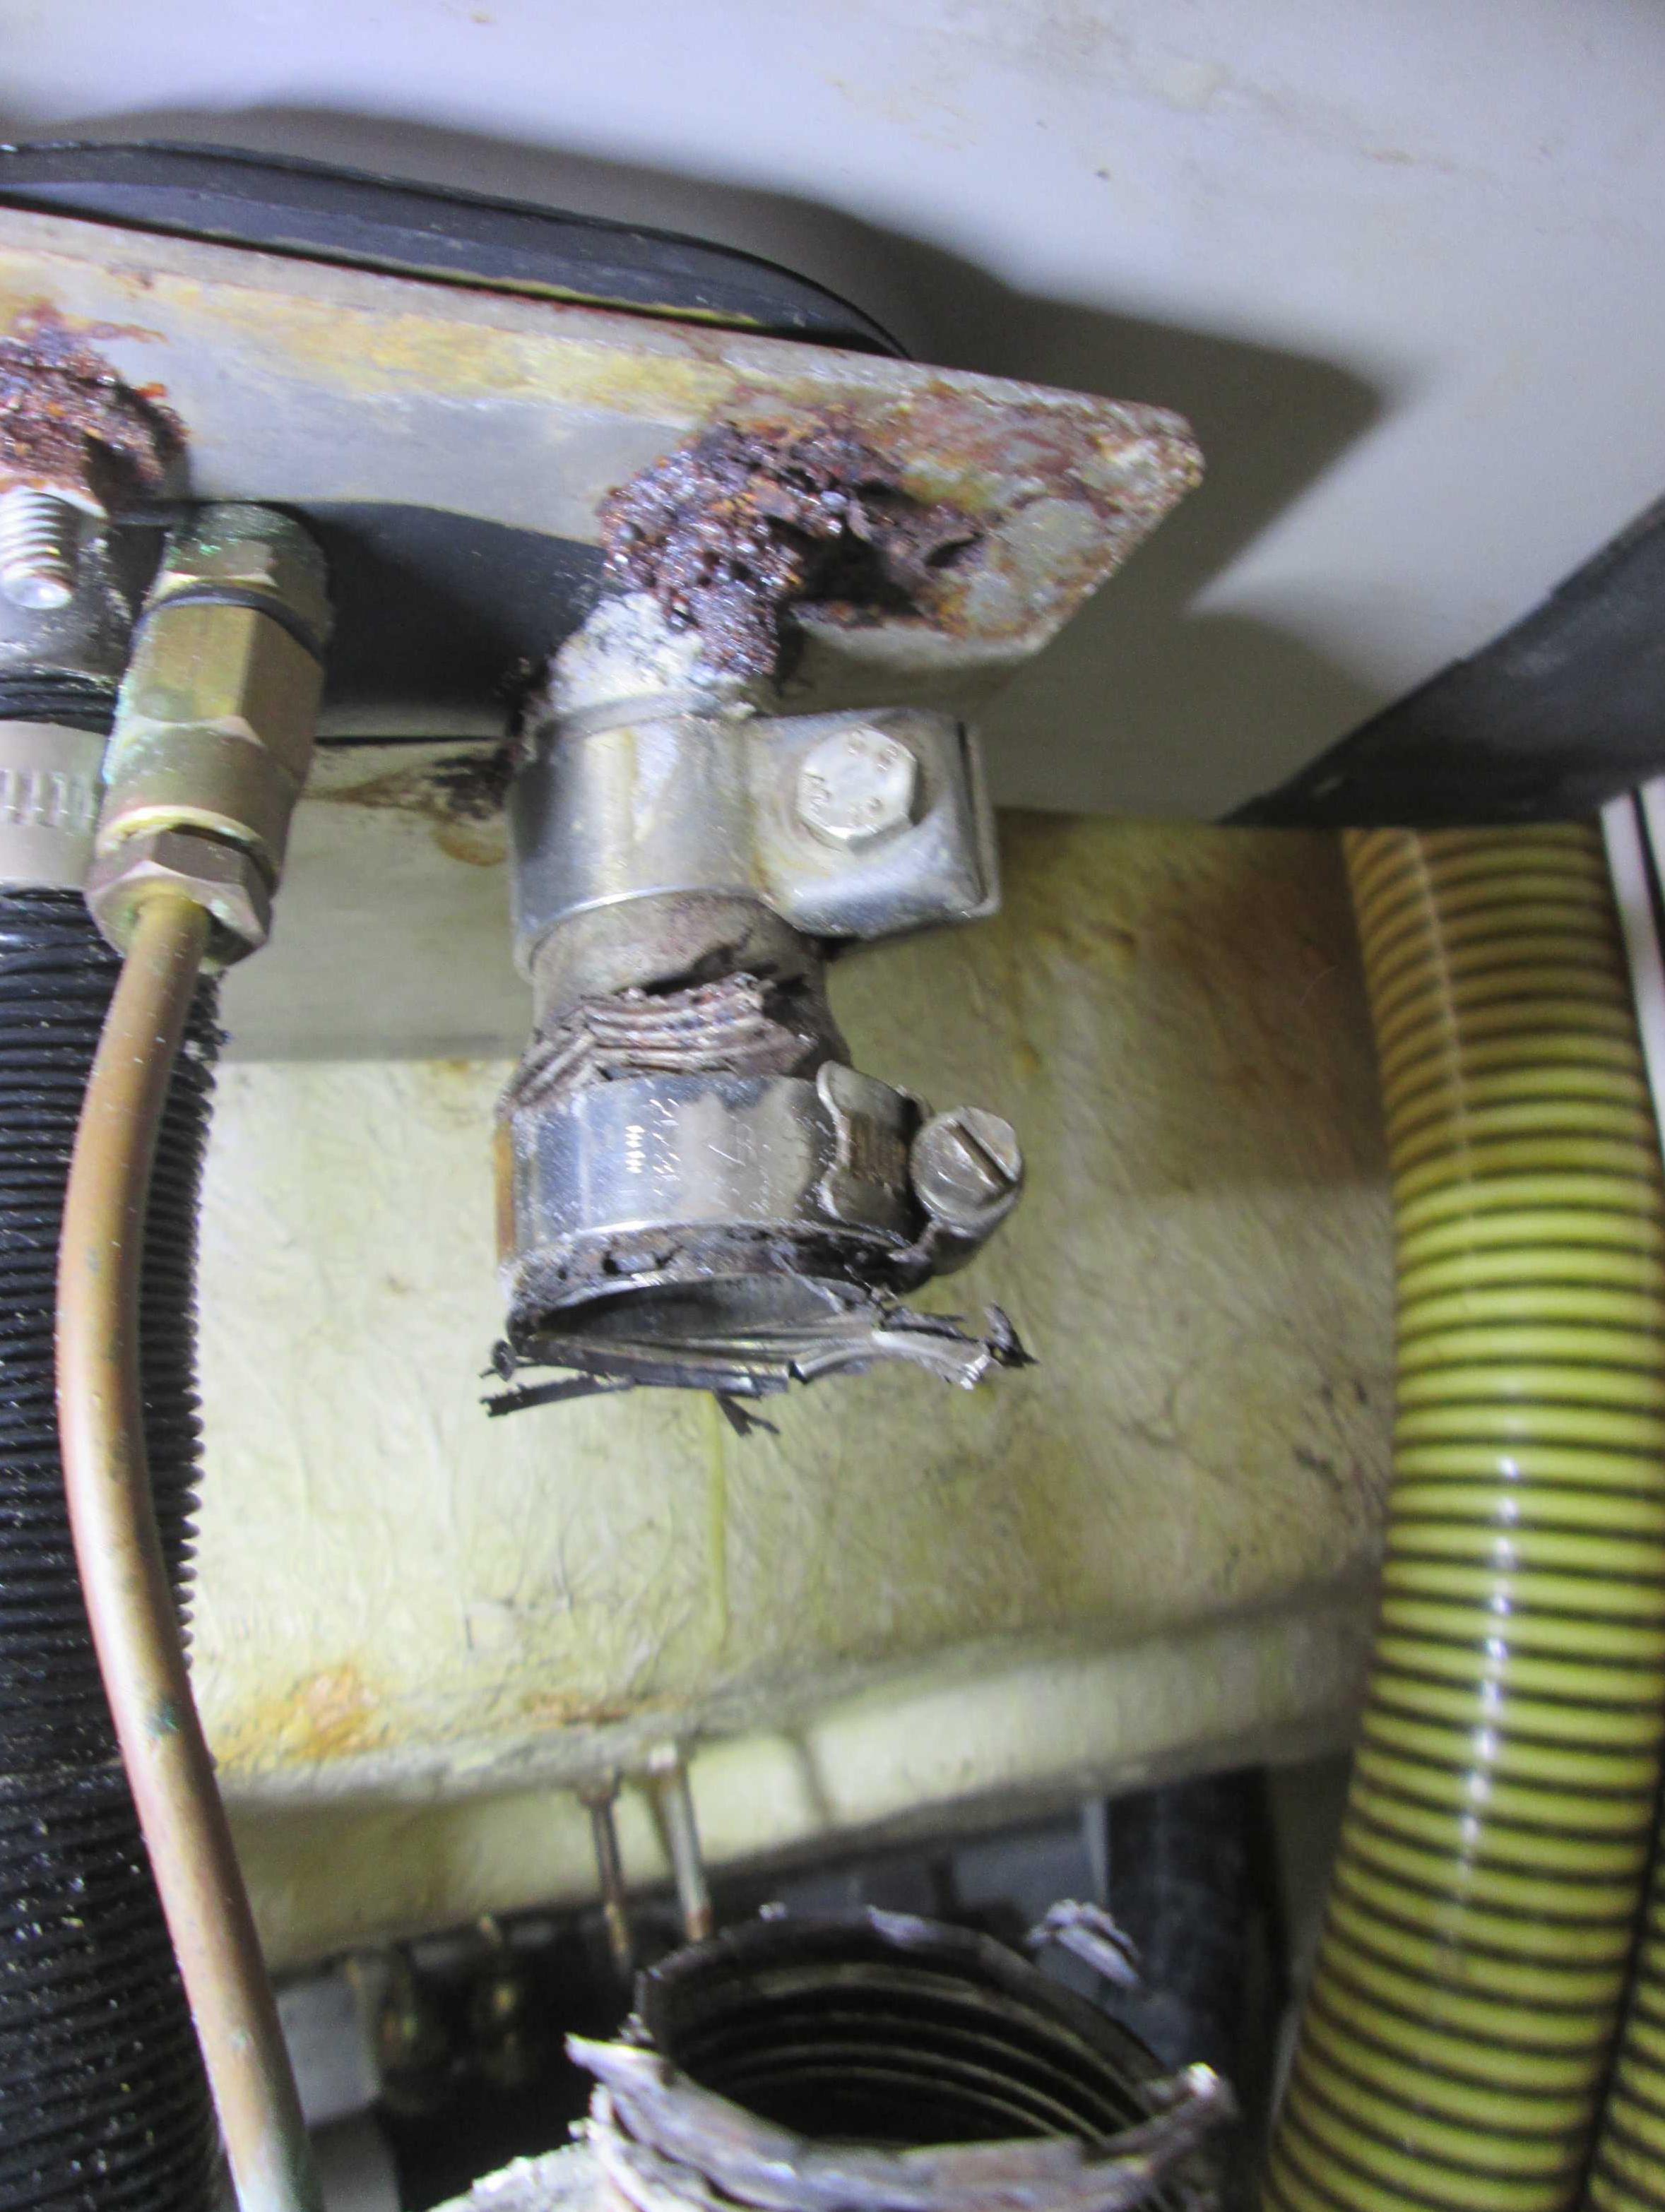 Carbon Monoxide Alarms on Yachts: Broken exhaust pipe of diesel-powered space heater